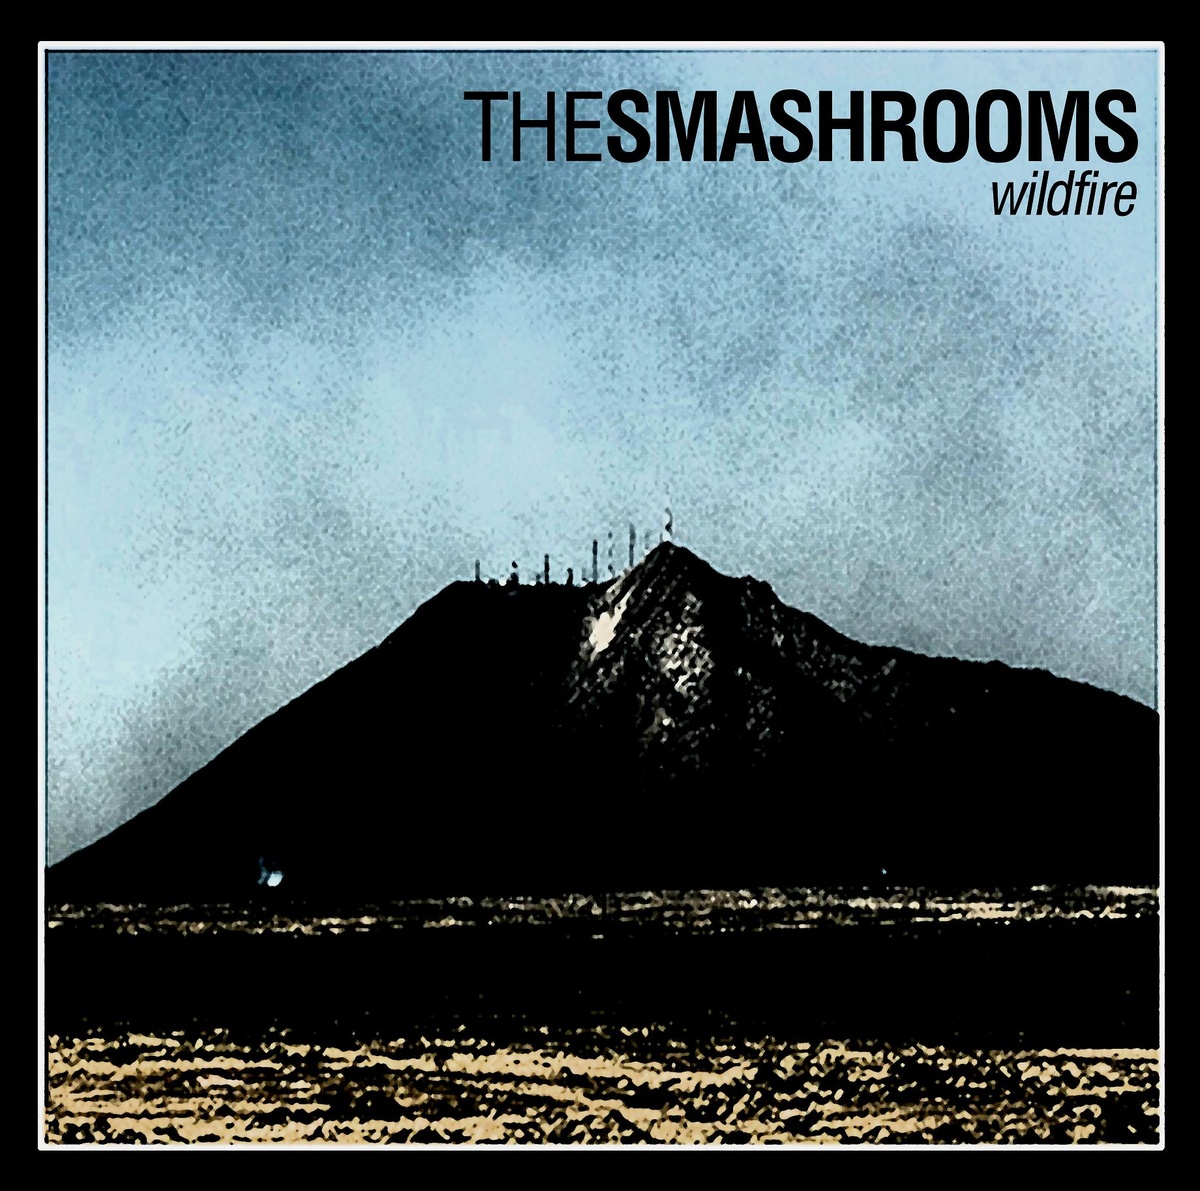 The Smashrooms stream song from upcoming album “Wildfire”